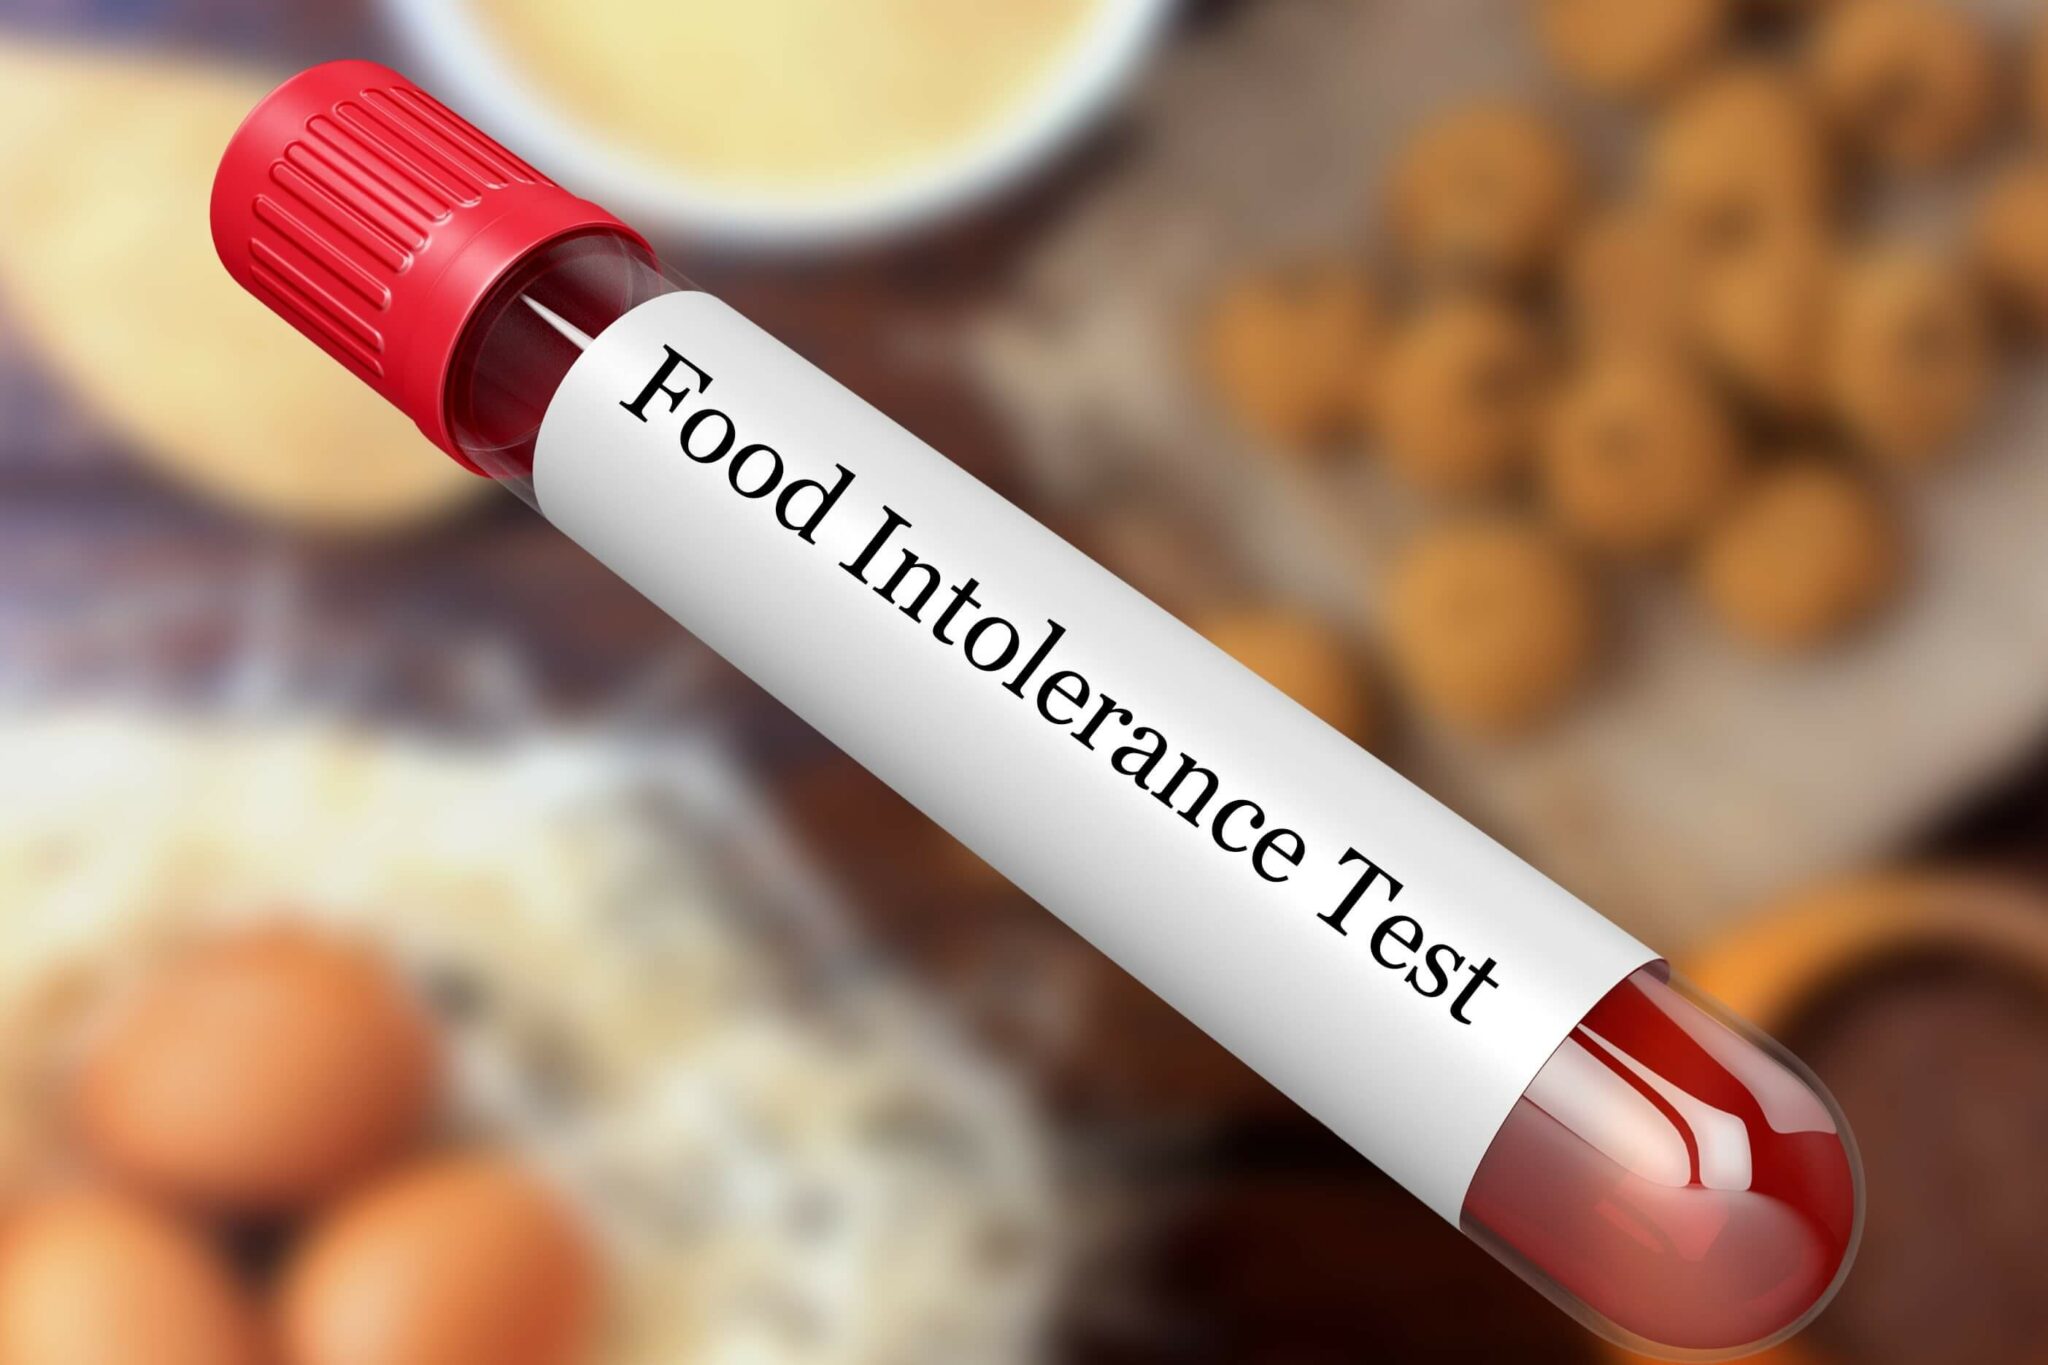 most food intolerance tests are not worth your time or money